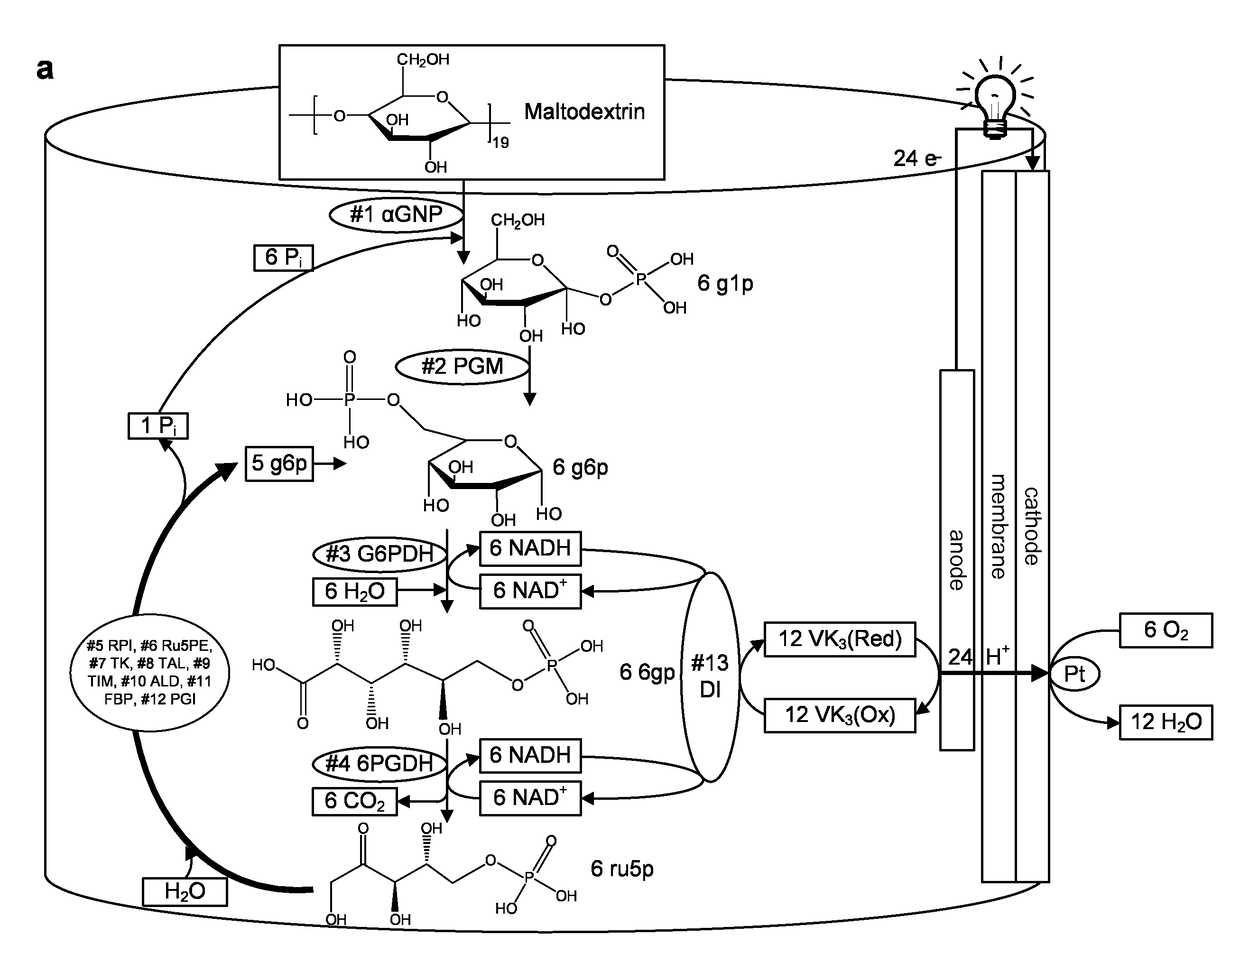 Complete oxidation of sugars to electricity by using cell-free synthetic enzymatic pathways